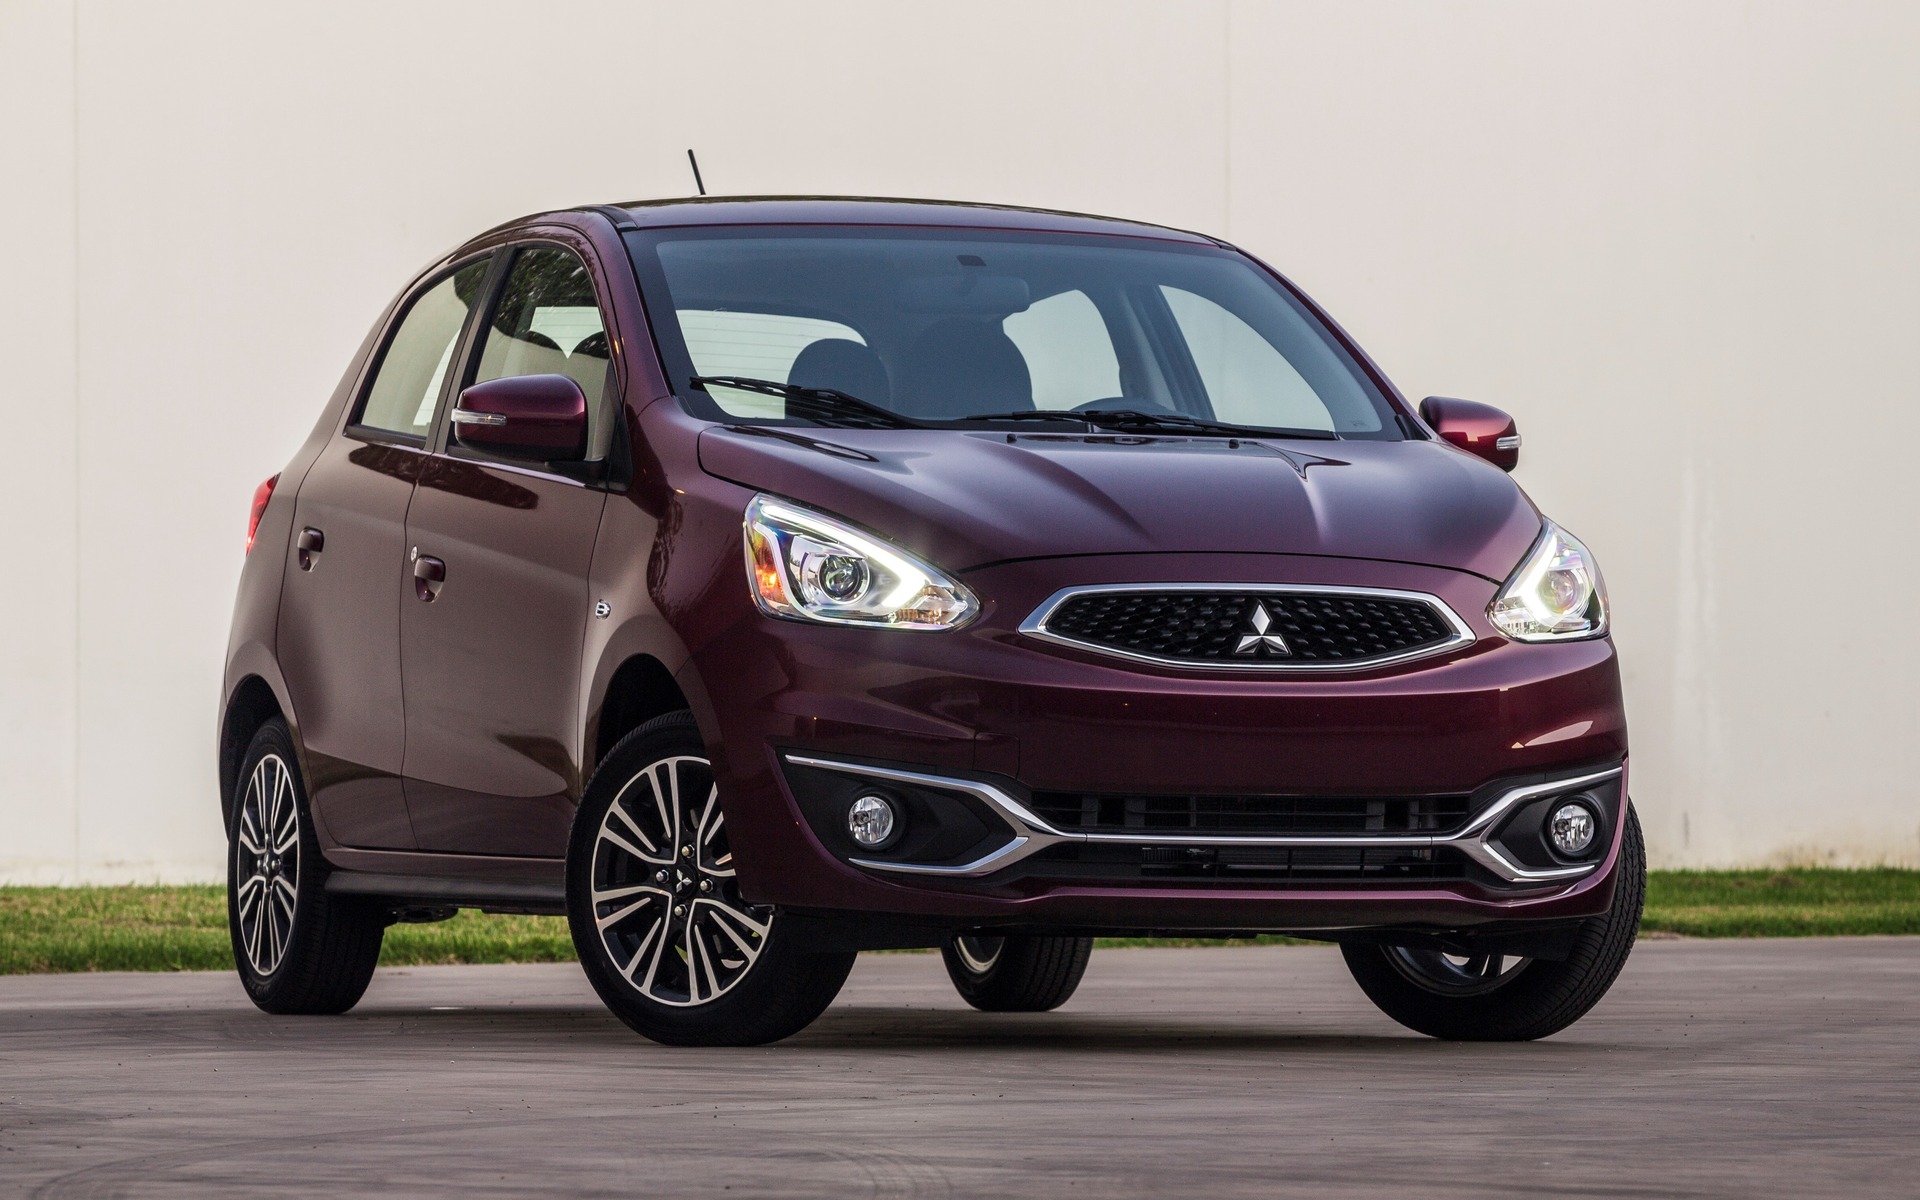 <p>2018 Mitsubishi Mirage: $10,998 before freight and delivery charges</p>